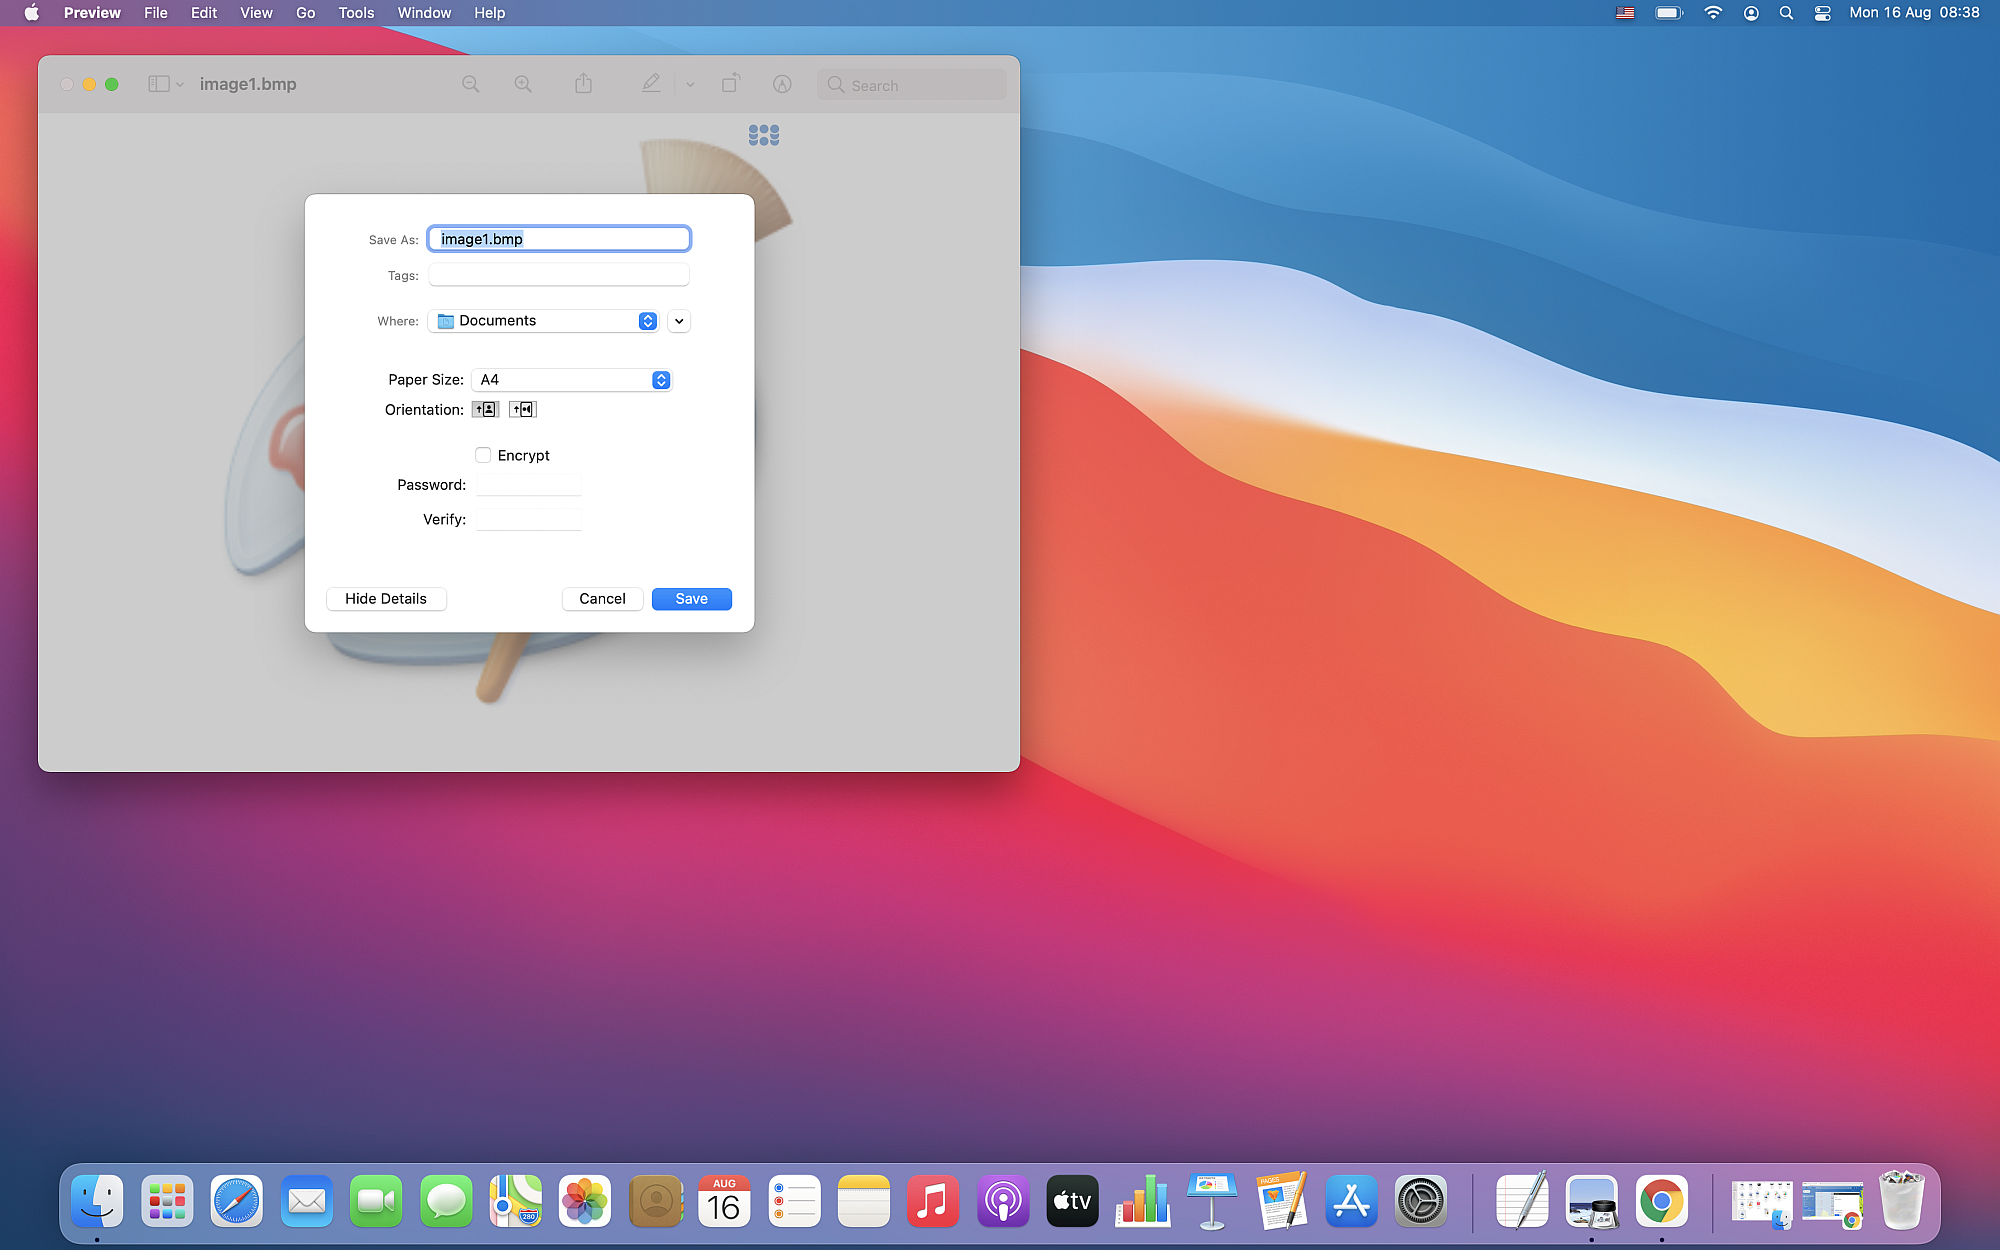 How to convert BMP to PDF files on macOS?